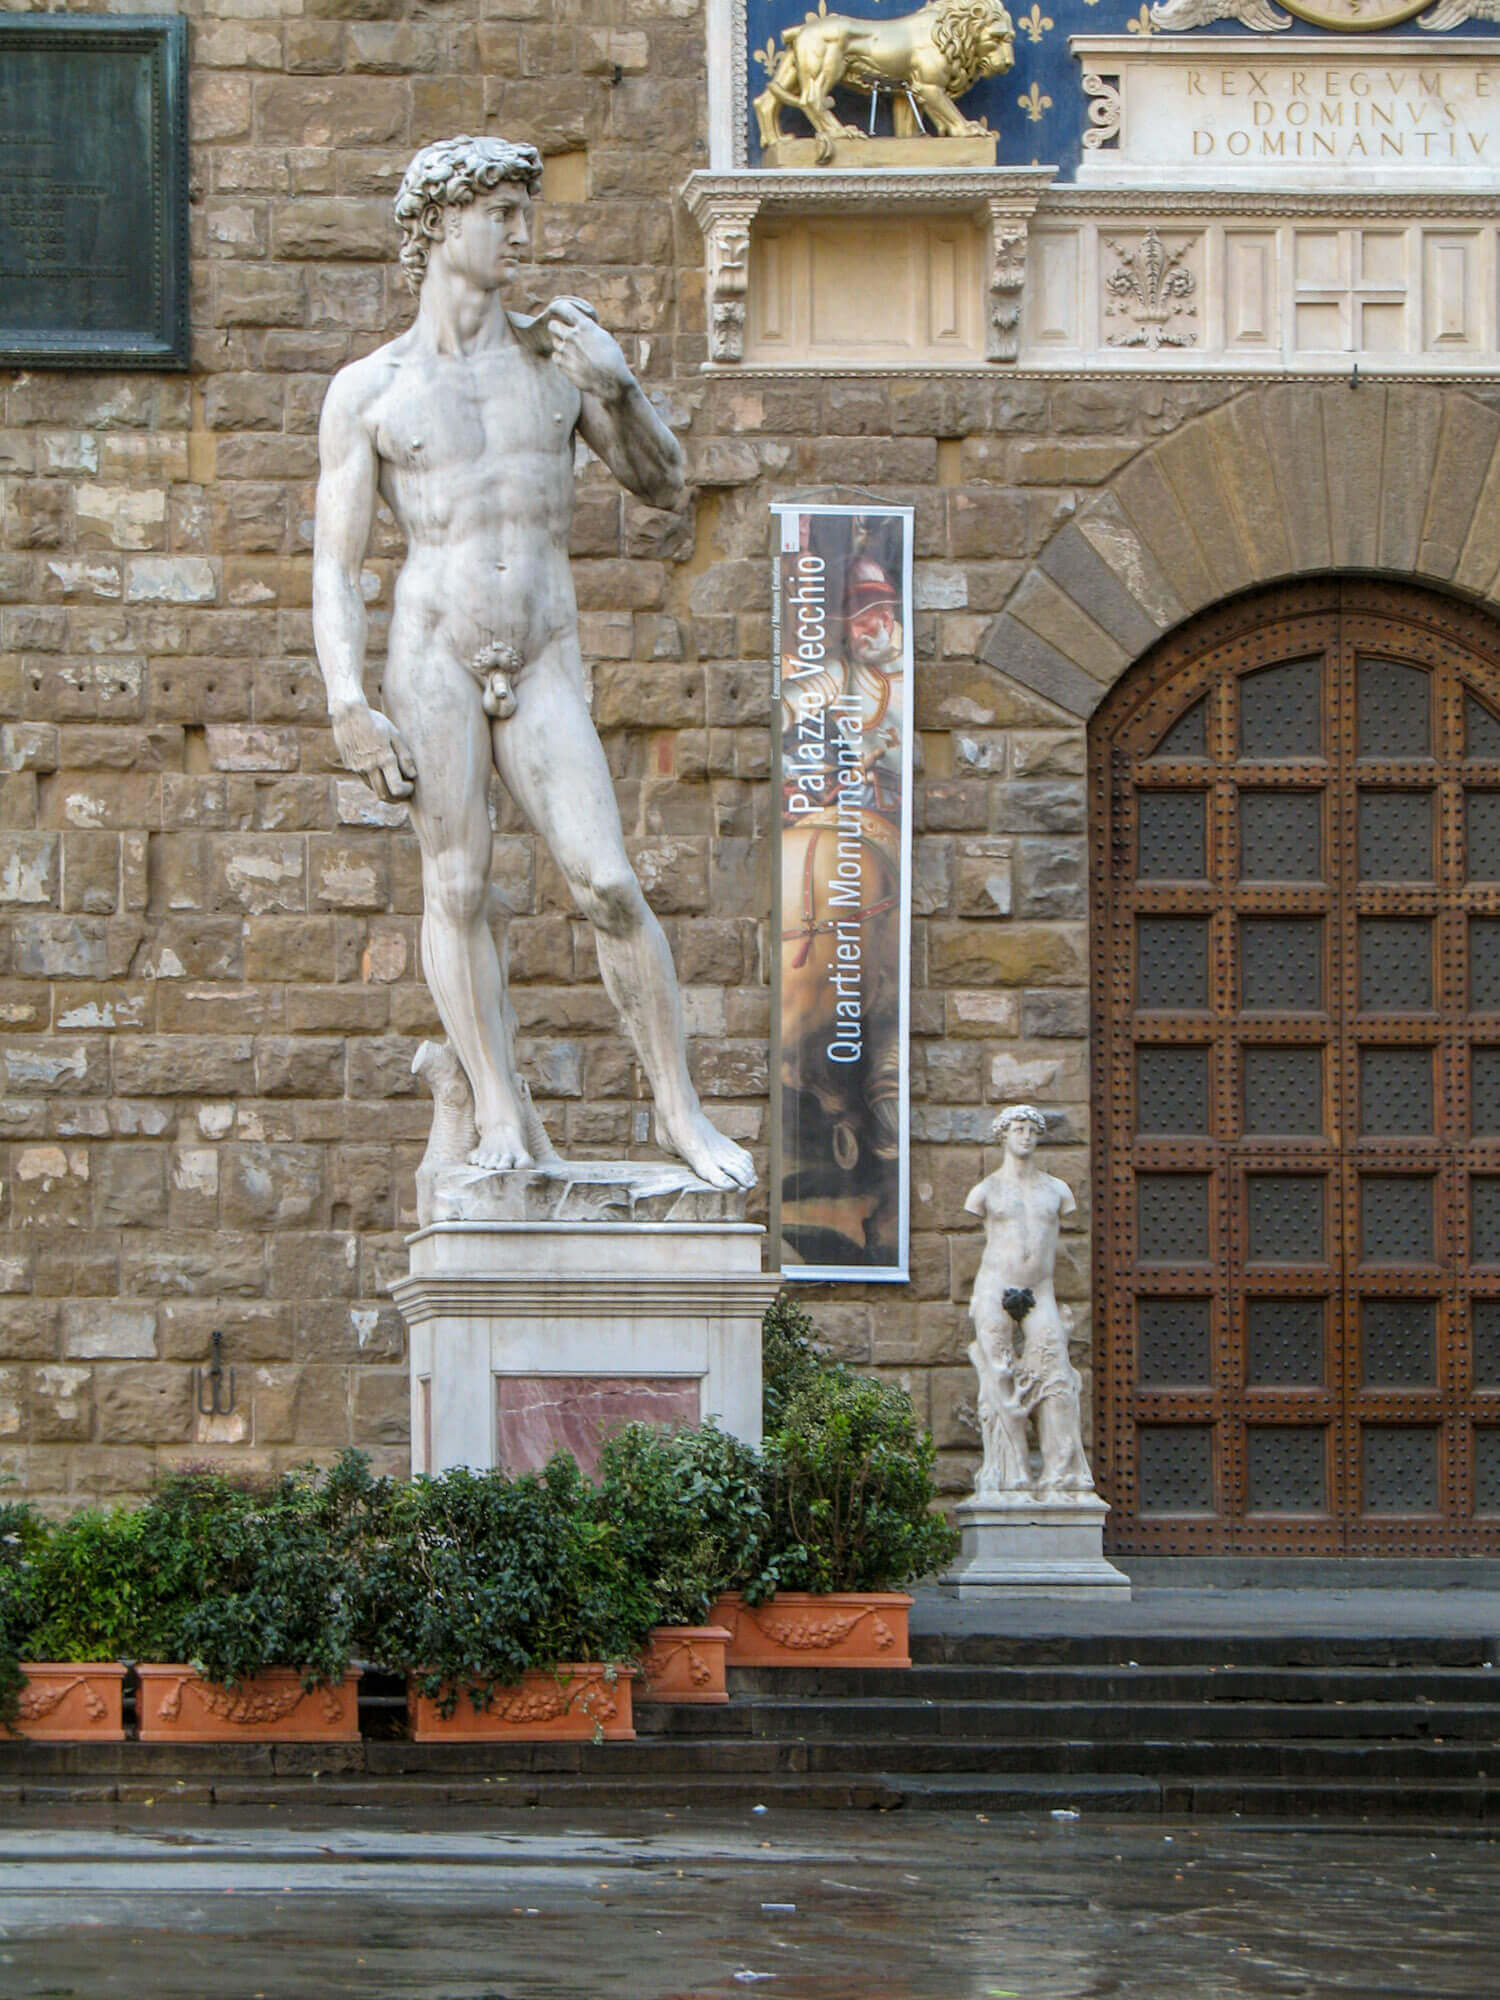 A replica of Michelangelo's David stands outside the Palazzo Vecchio where the original once stood, before being moved to the Galleria dell'Accademia